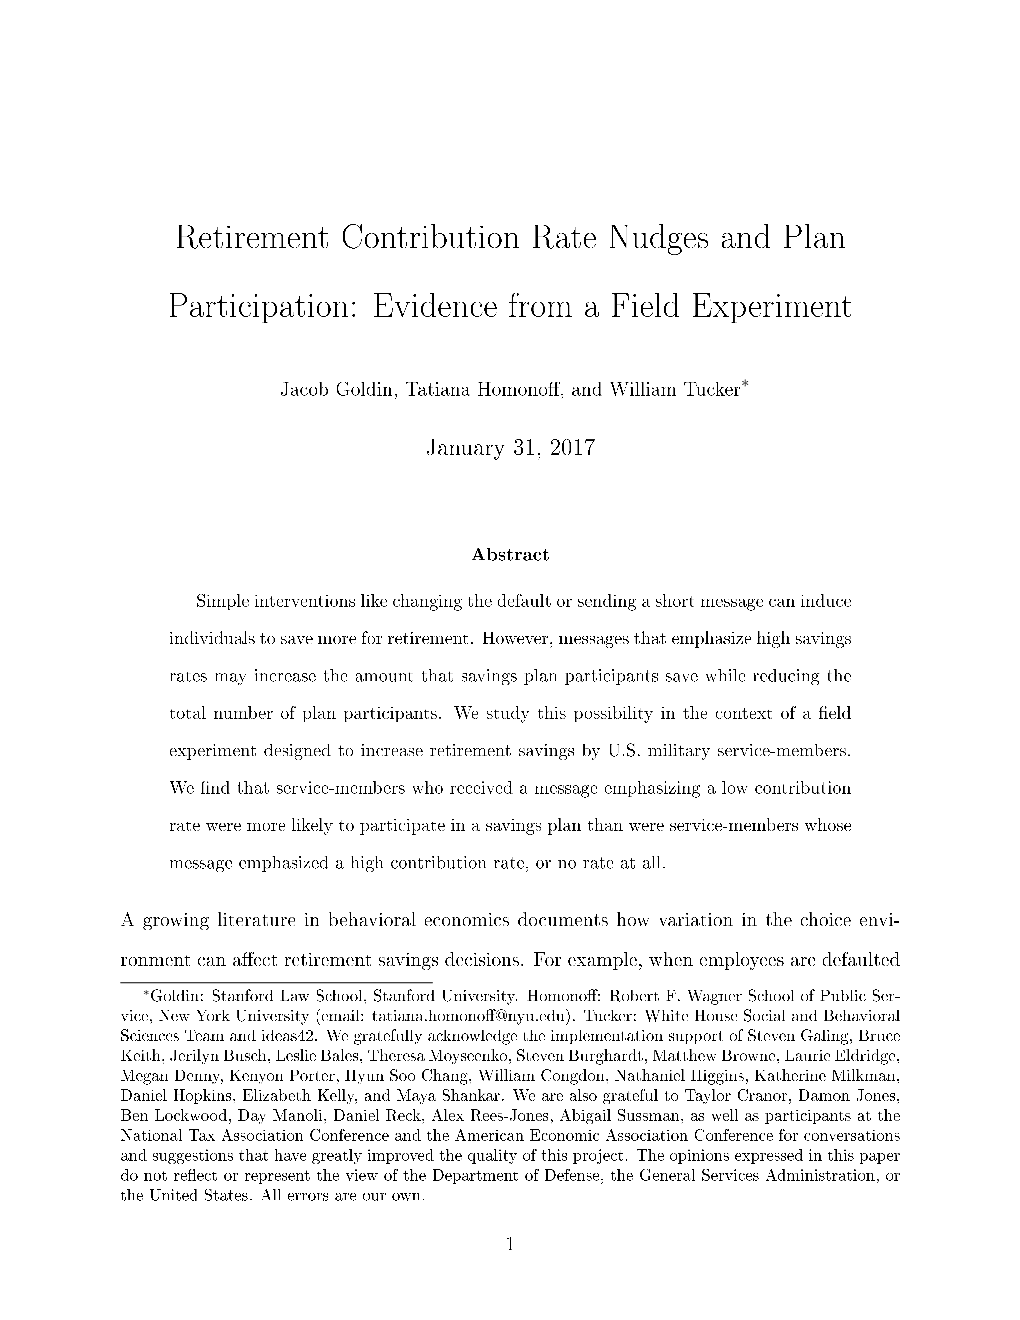 Retirement Contribution Rate Nudges and Plan Participation: Evidence from a Field Experiment